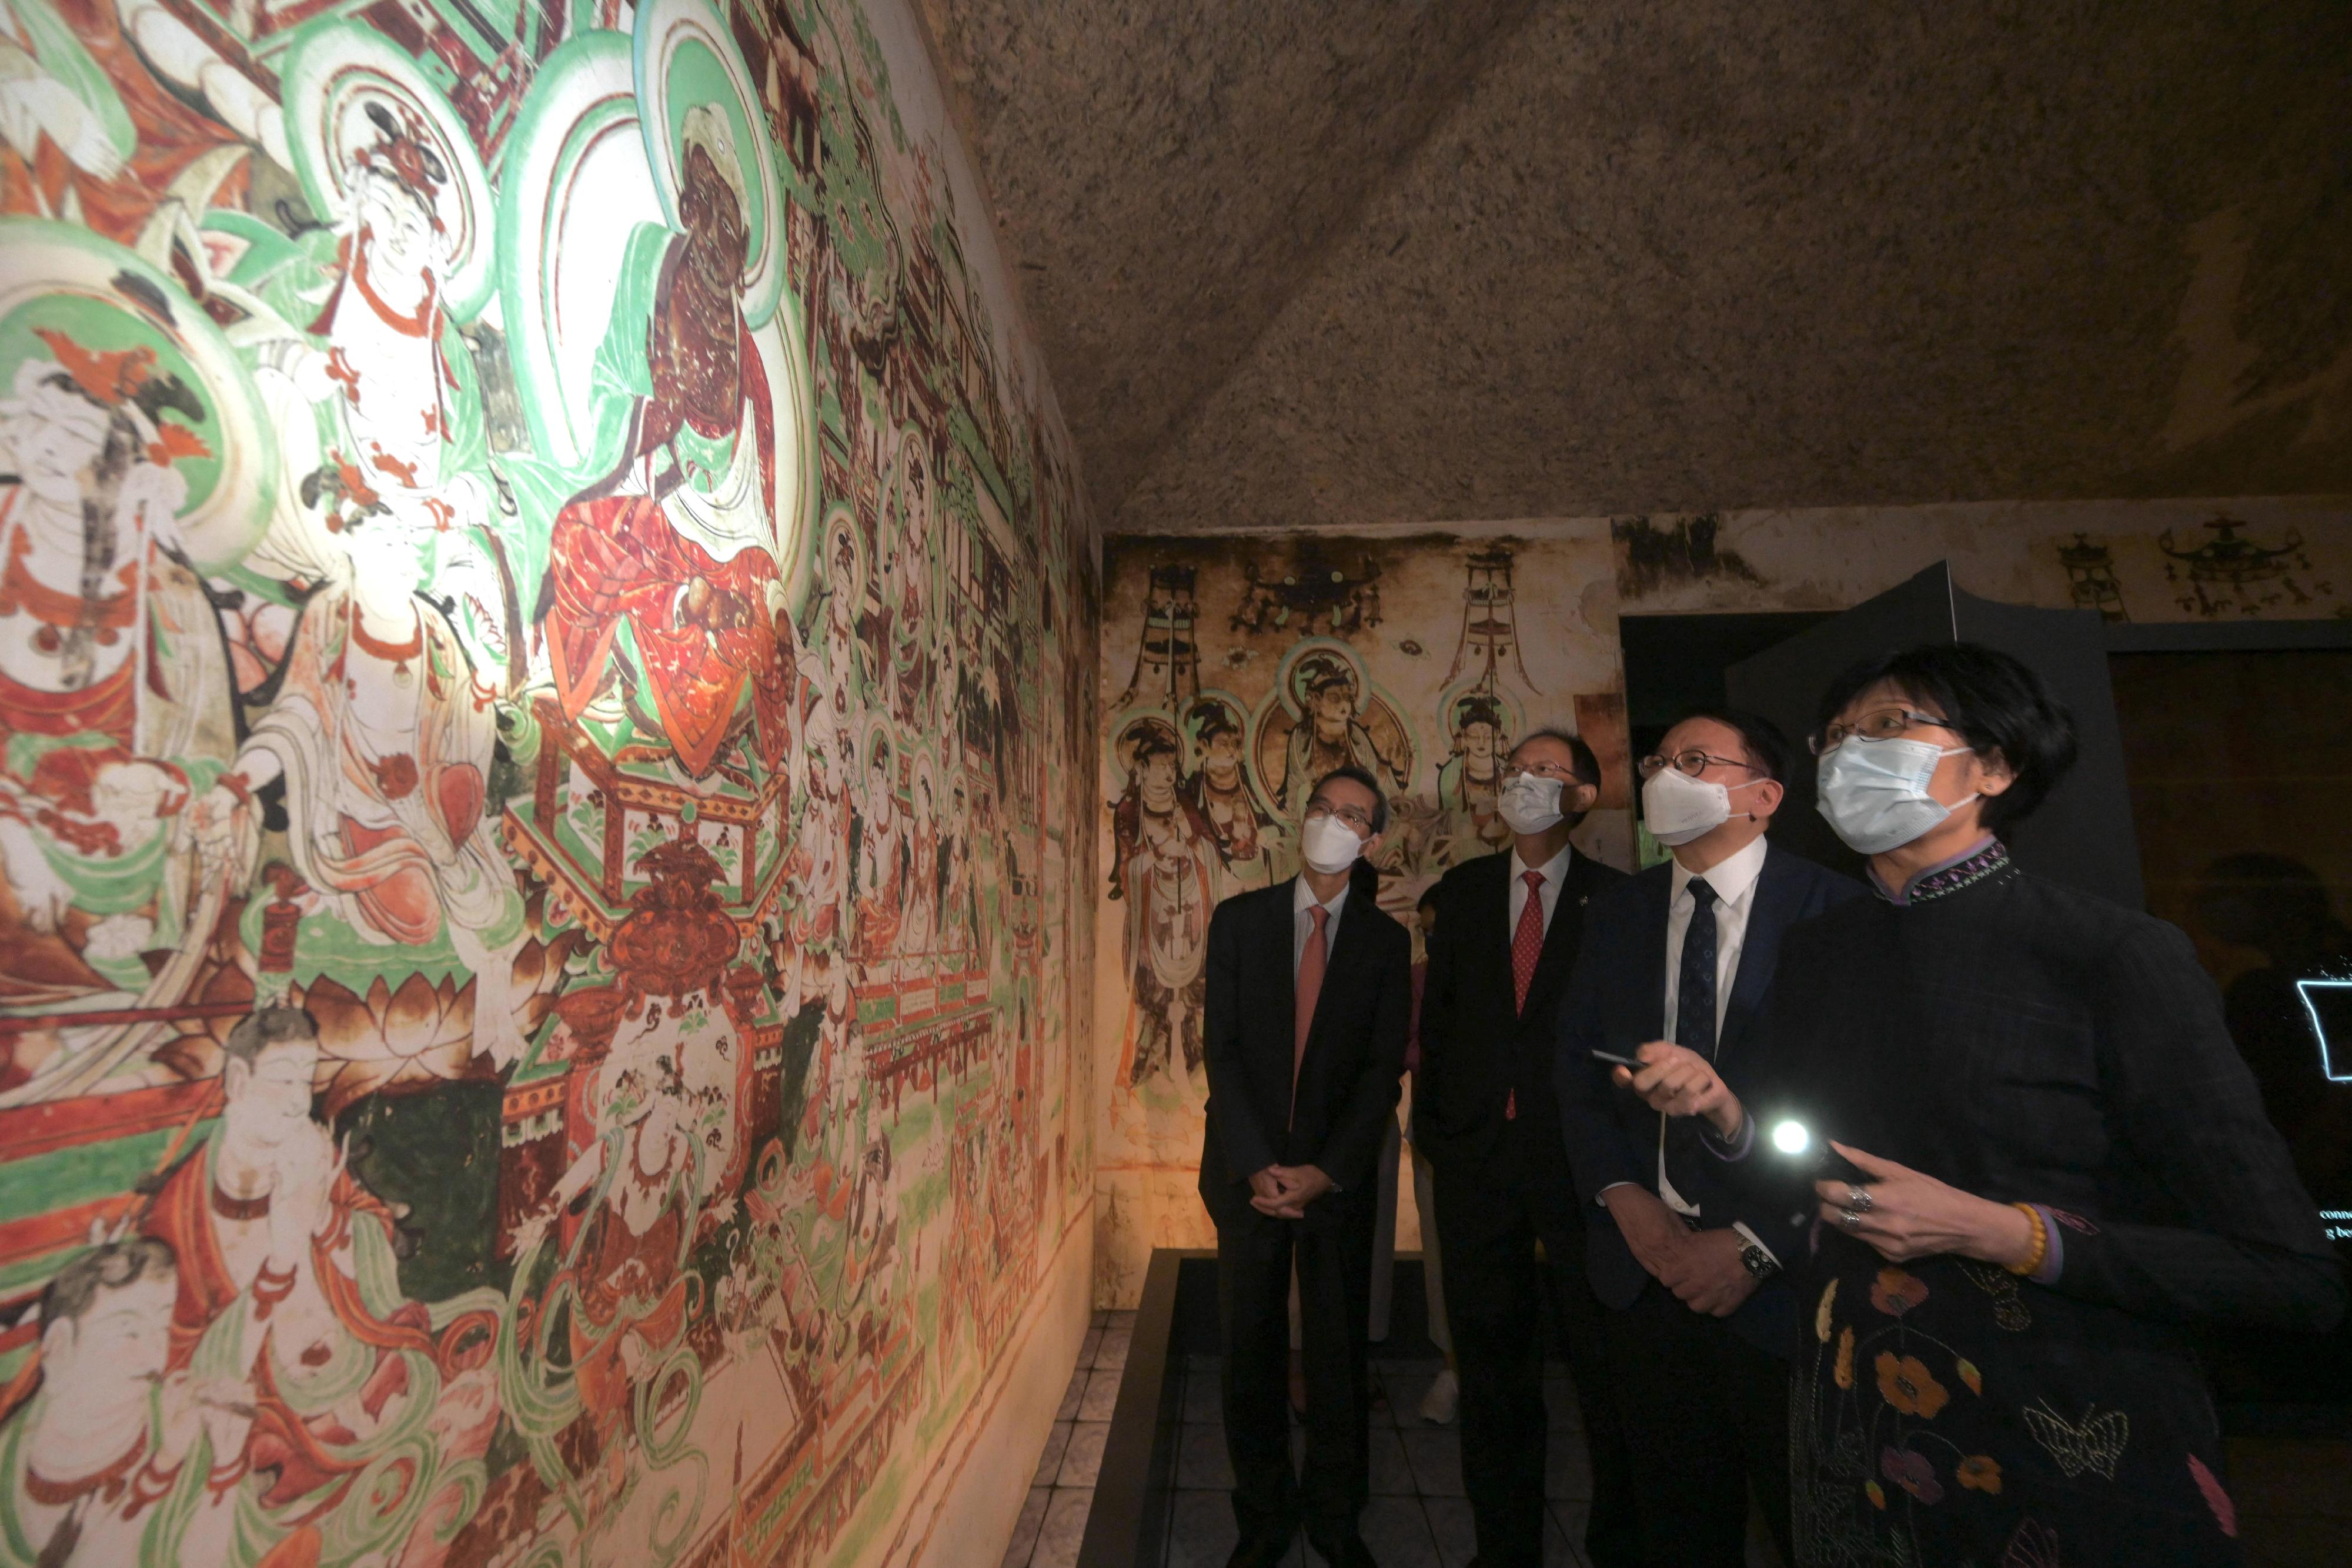 The opening ceremony for the exhibition "The Hong Kong Jockey Club Series: Dunhuang: Enchanting Tales for Millennium" was held today (August 23) at the Hong Kong Heritage Museum. Photo shows the Chief Secretary for Administration, Mr Chan Kwok-ki (second right) touring the exhibition.